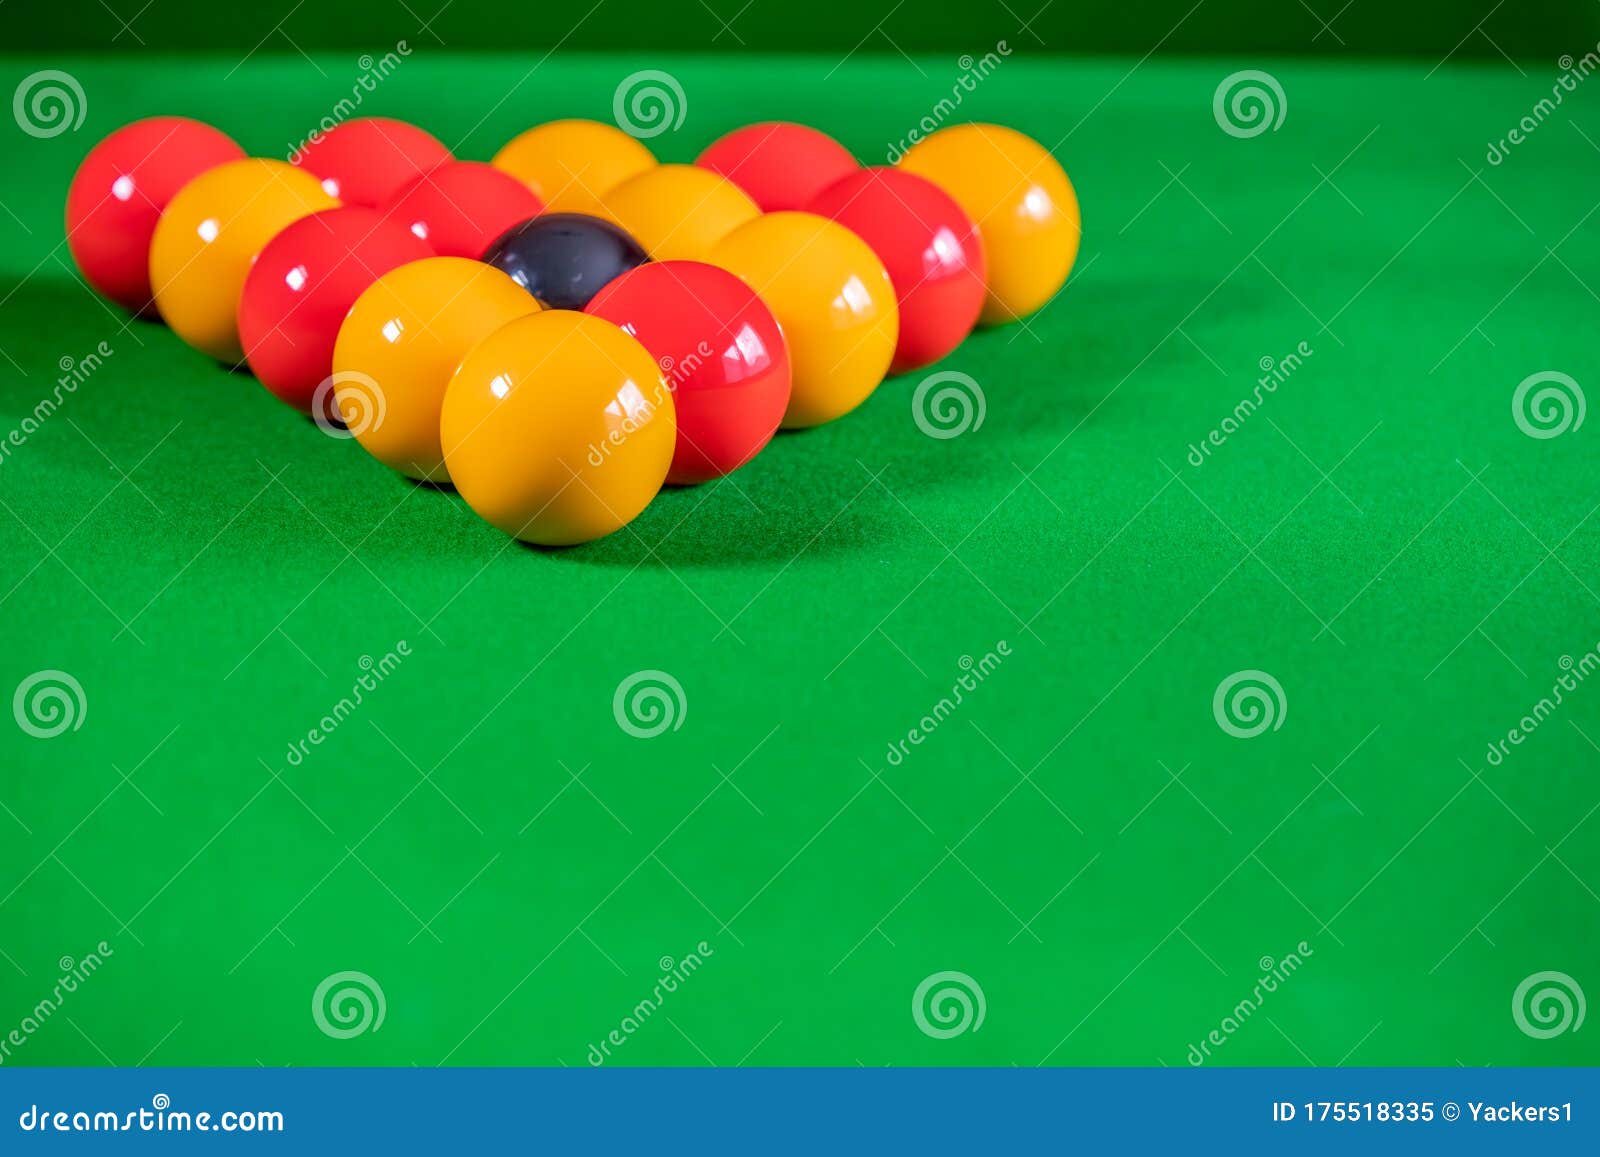 PowerGlide Pool Balls in Red and Yellow